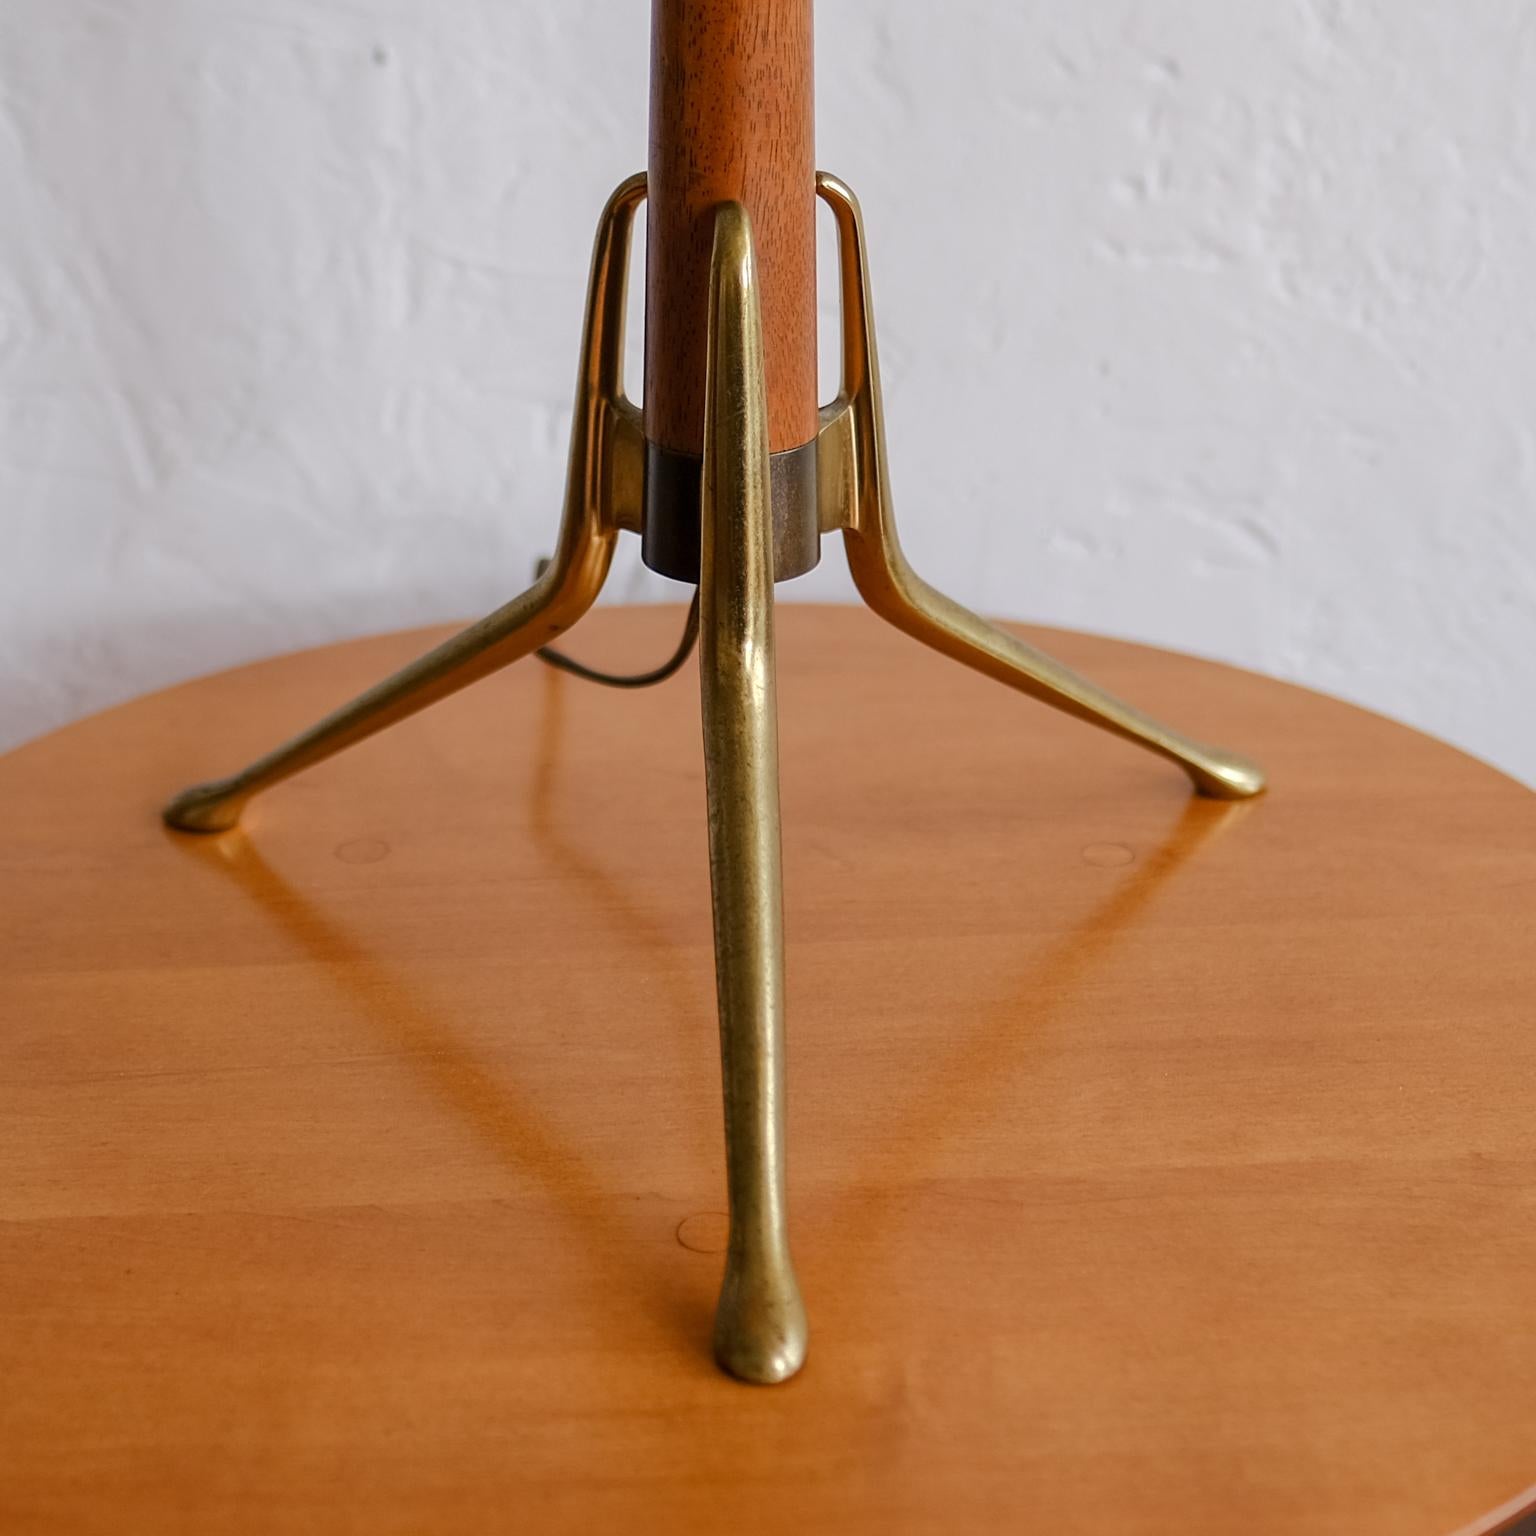 North American Brass and Walnut Tripod Table Lamp by Gerald Thurston for Lightolier